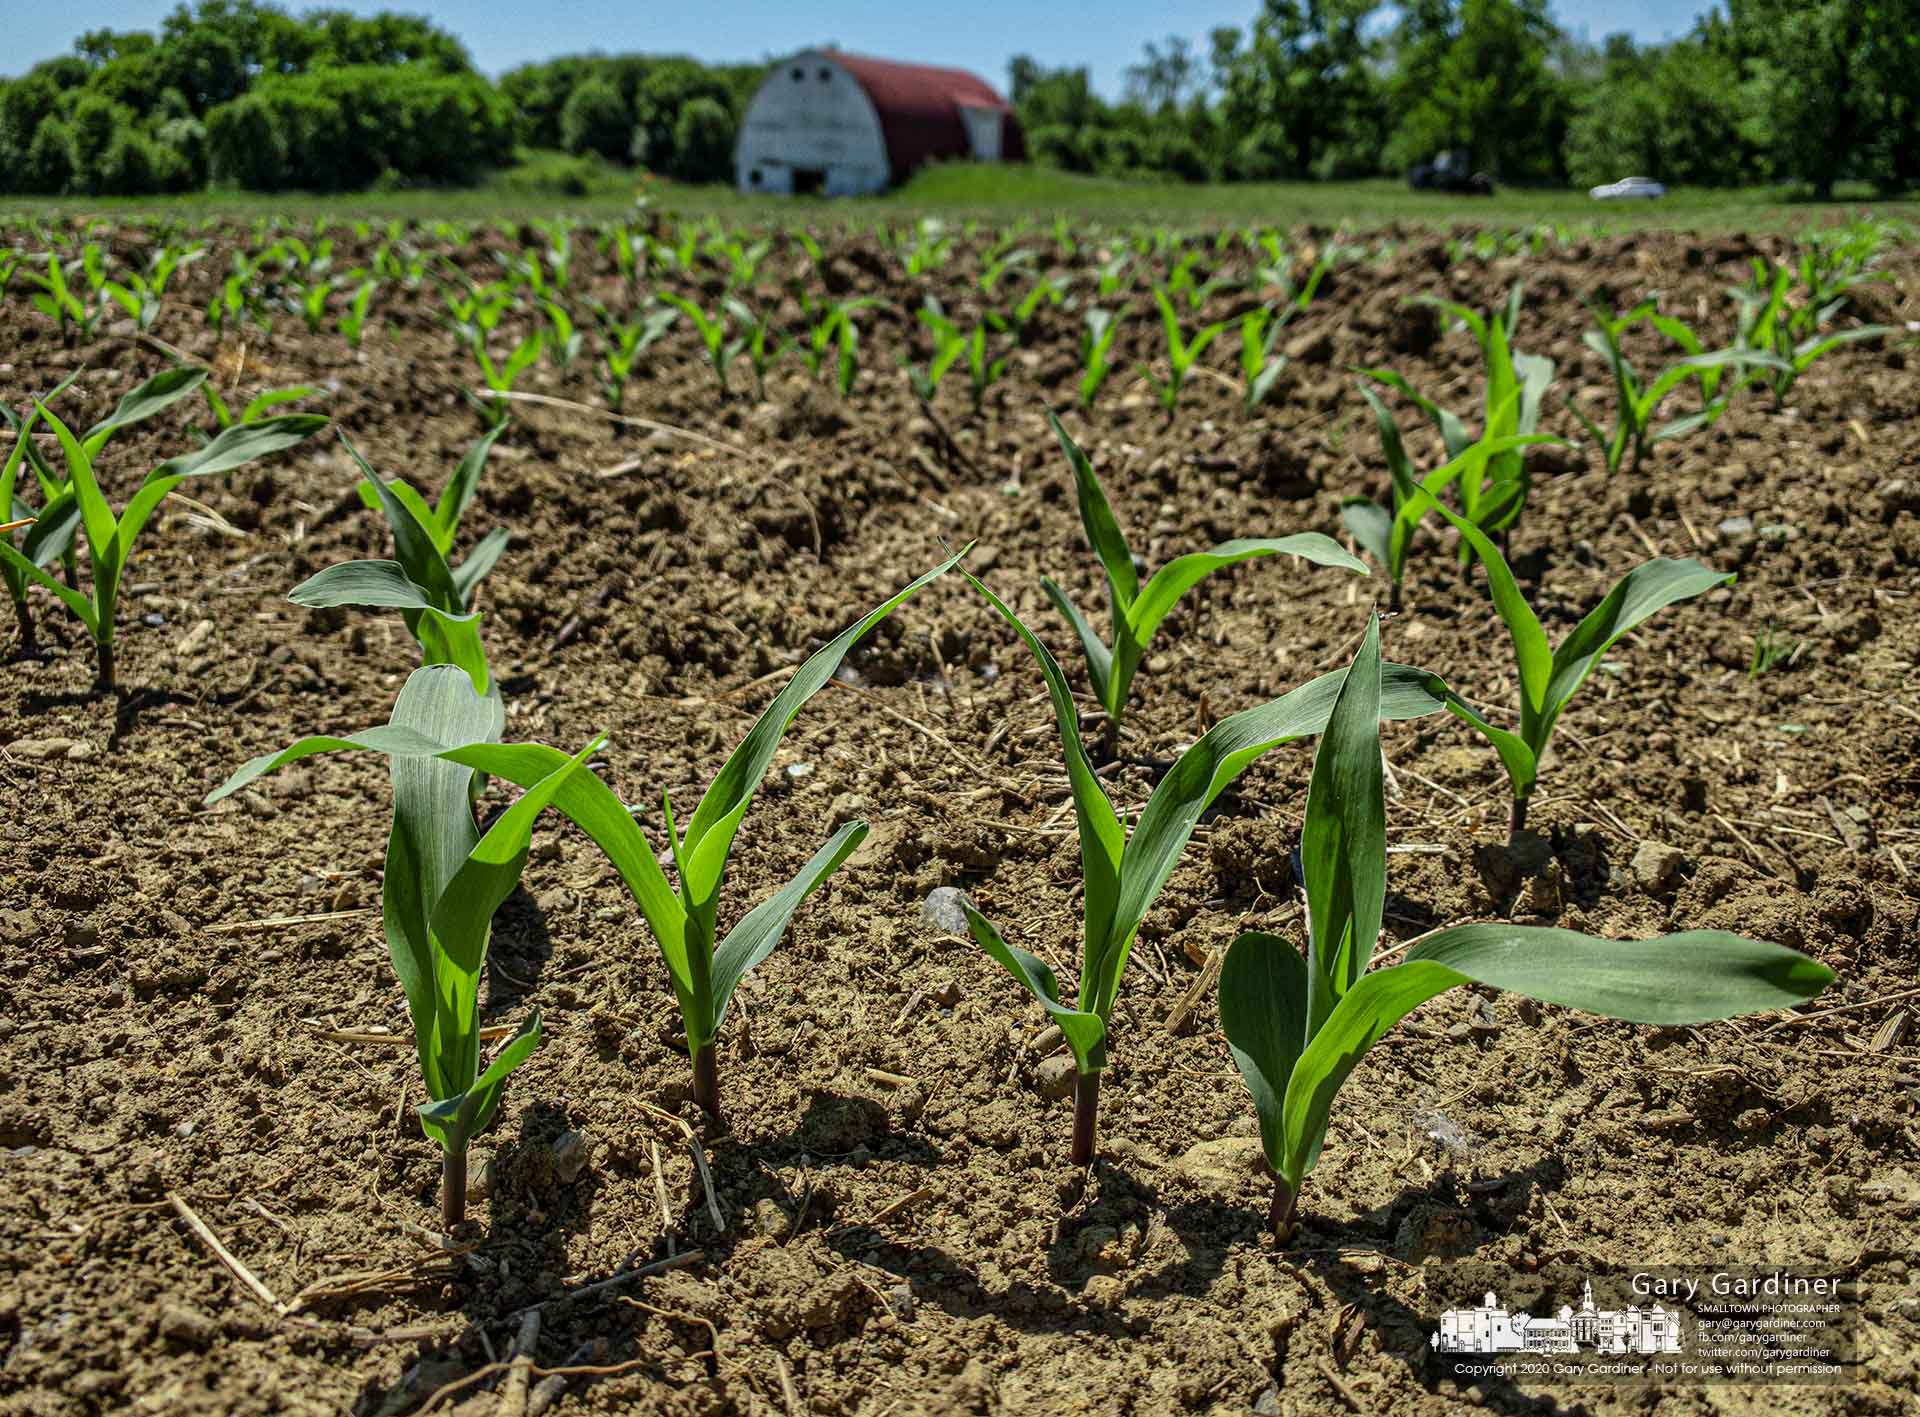 Corn planted May 31 rises from a section of the field at the Braun Farm on Cleveland Ave. My Final Photo for June 8, 2020.